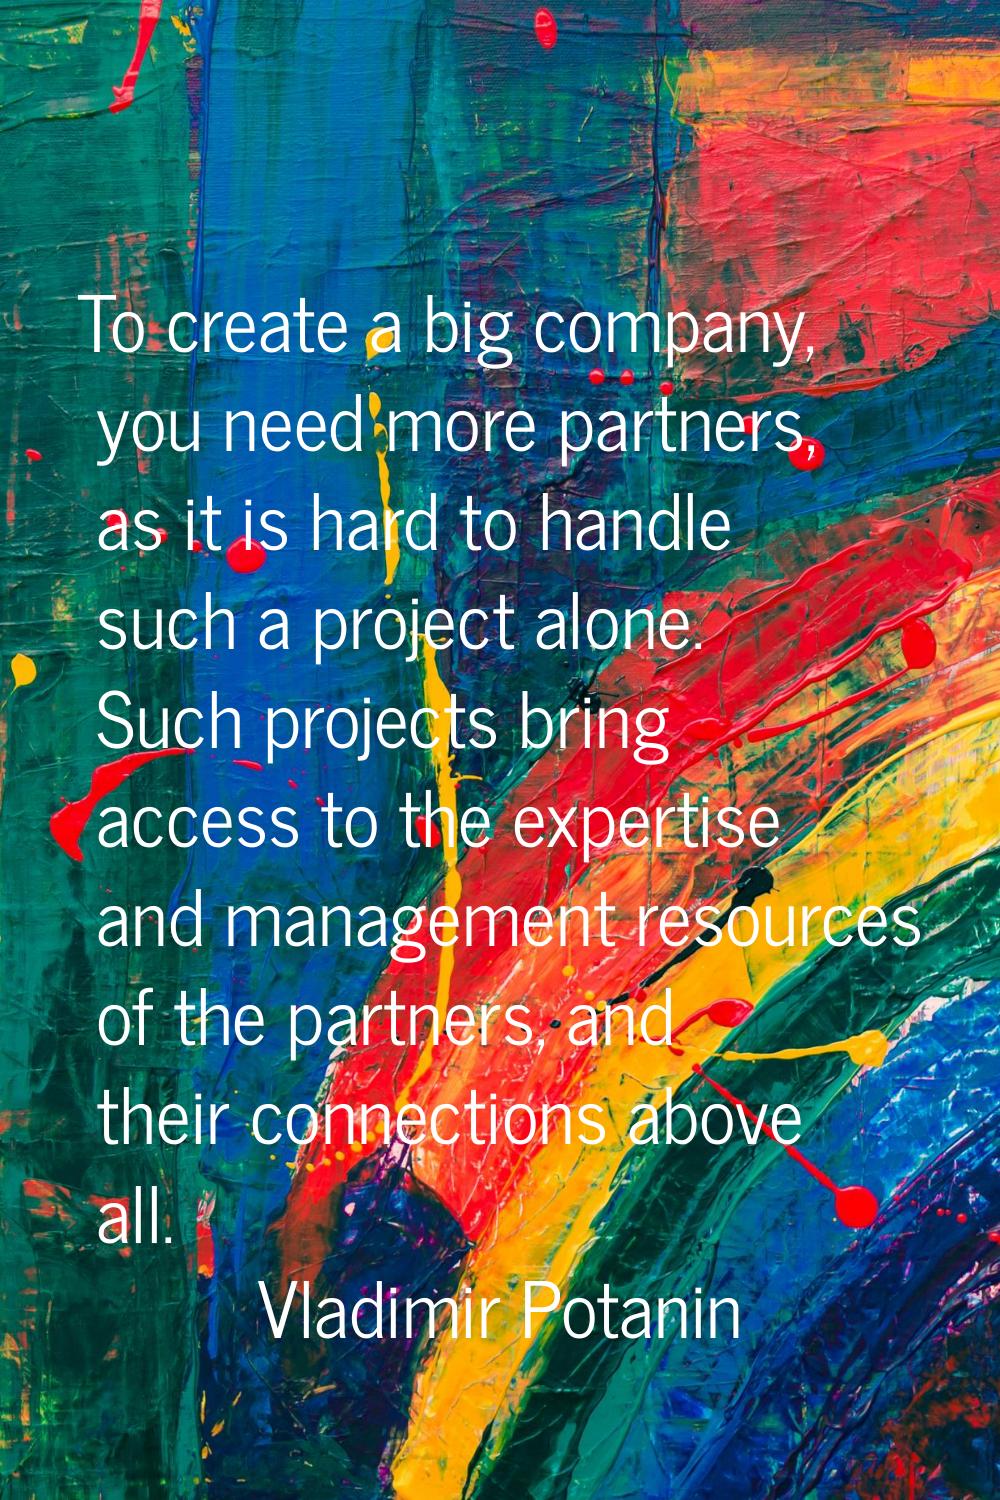 To create a big company, you need more partners, as it is hard to handle such a project alone. Such